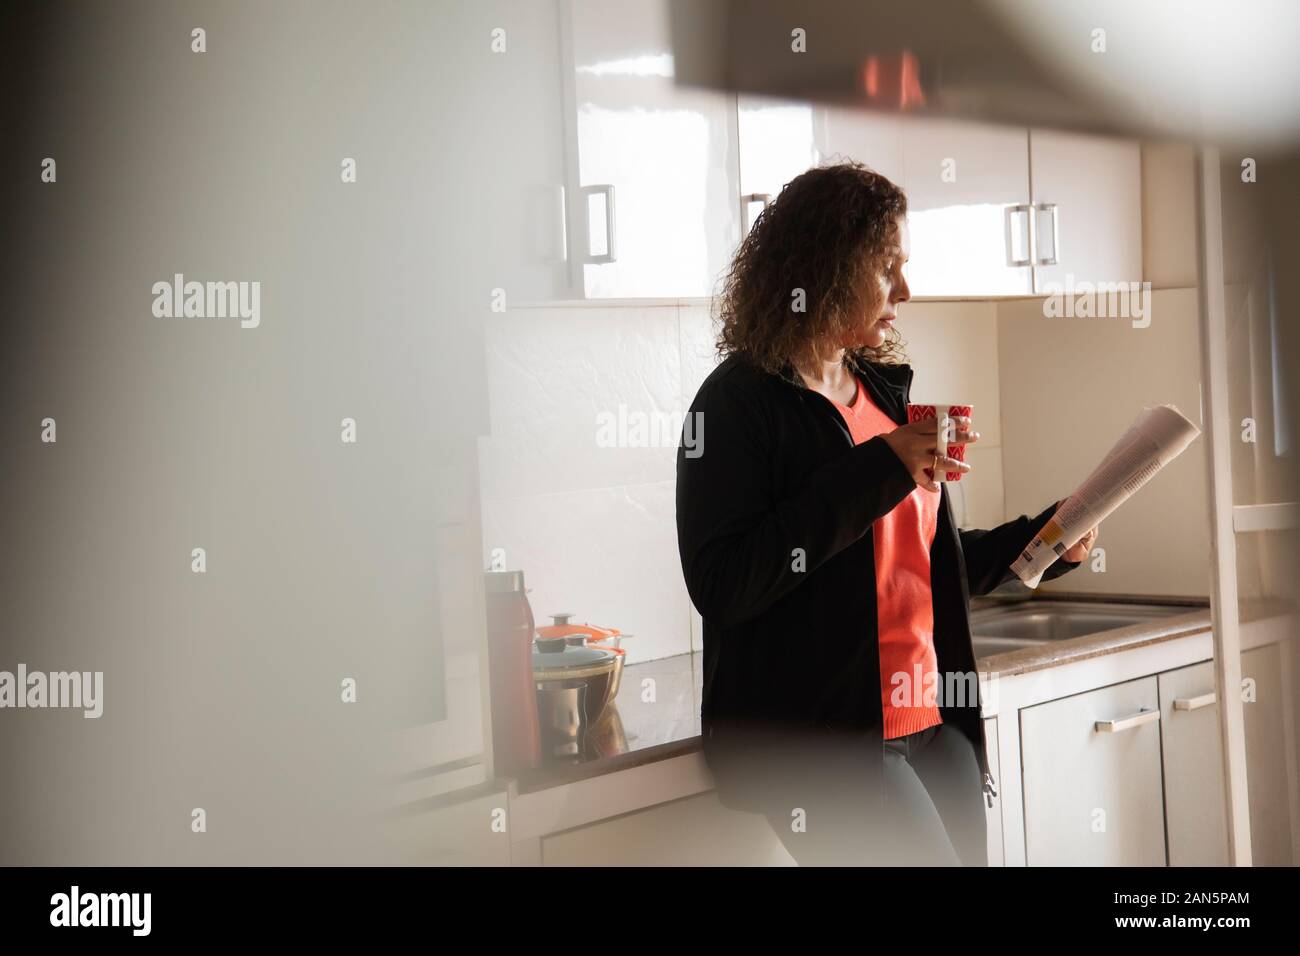 Woman drinking coffee while reading a newspaper in the kitchen at home. Stock Photo